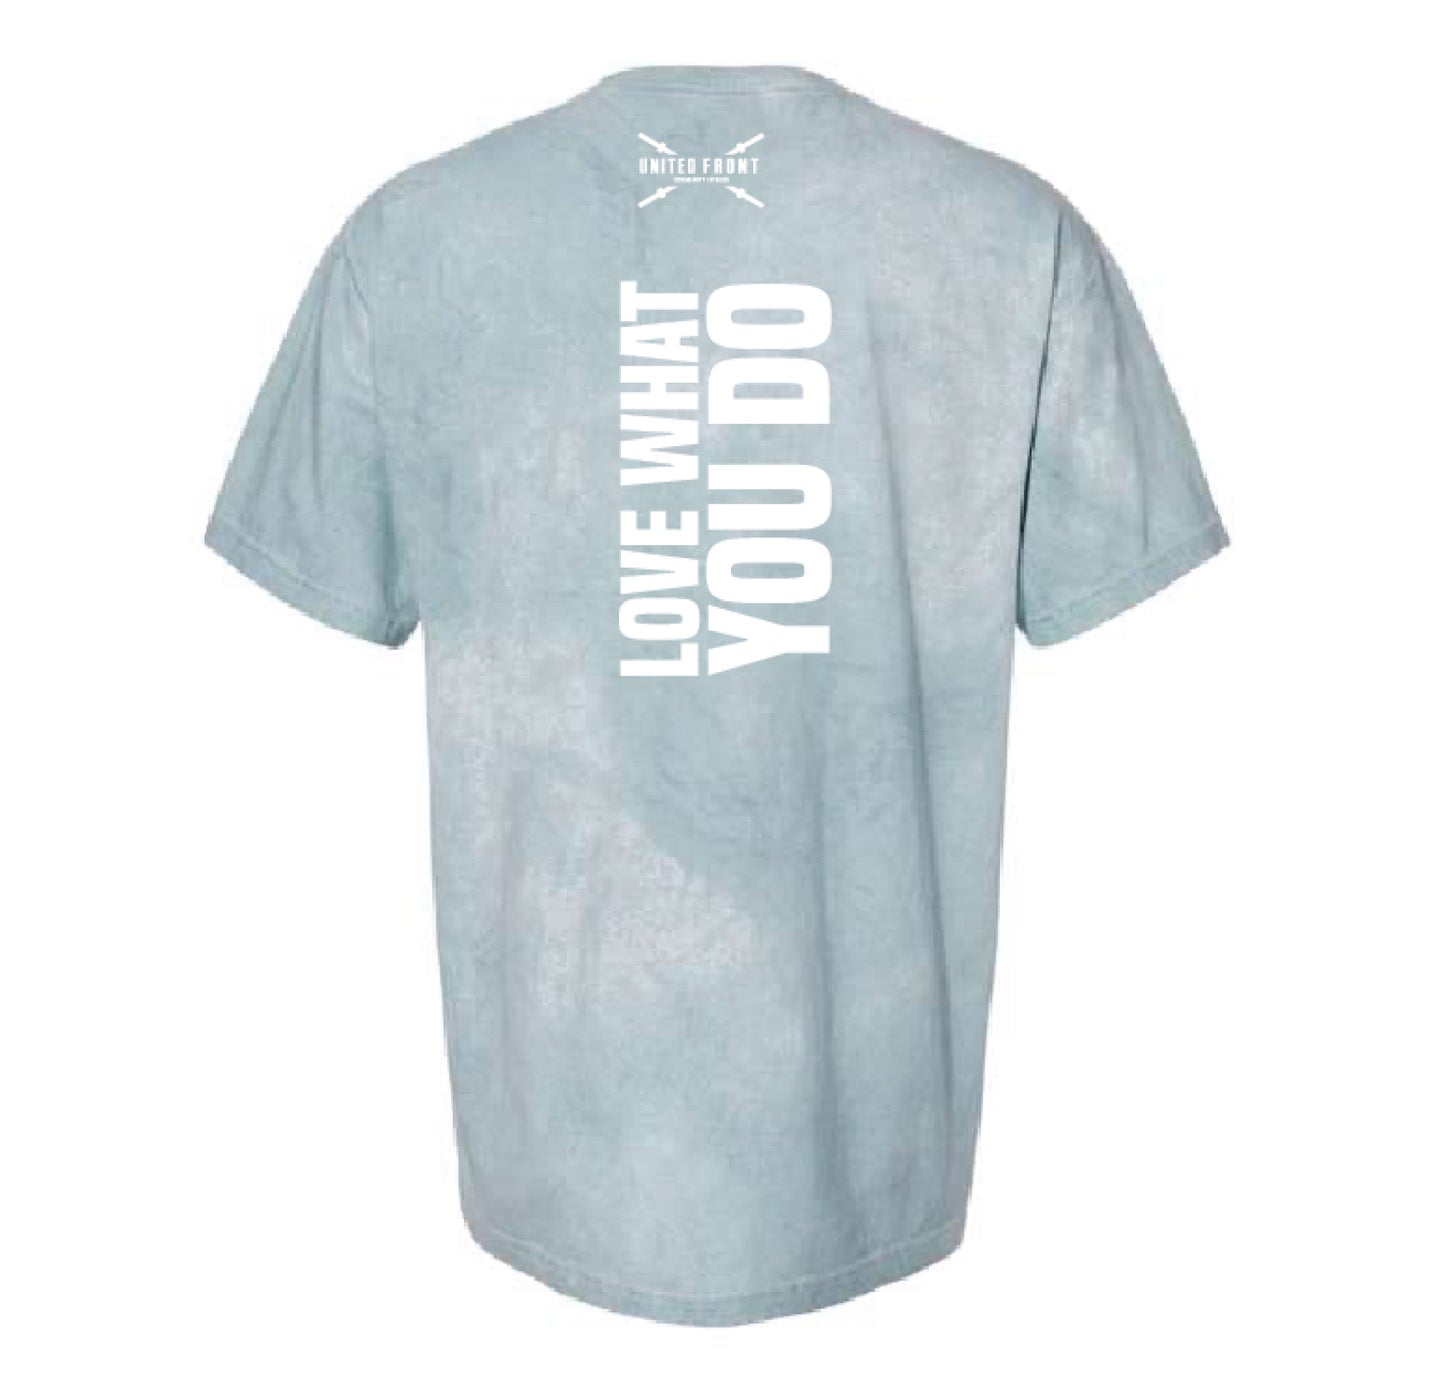 United Front tie dye shirt (better for oversized look)